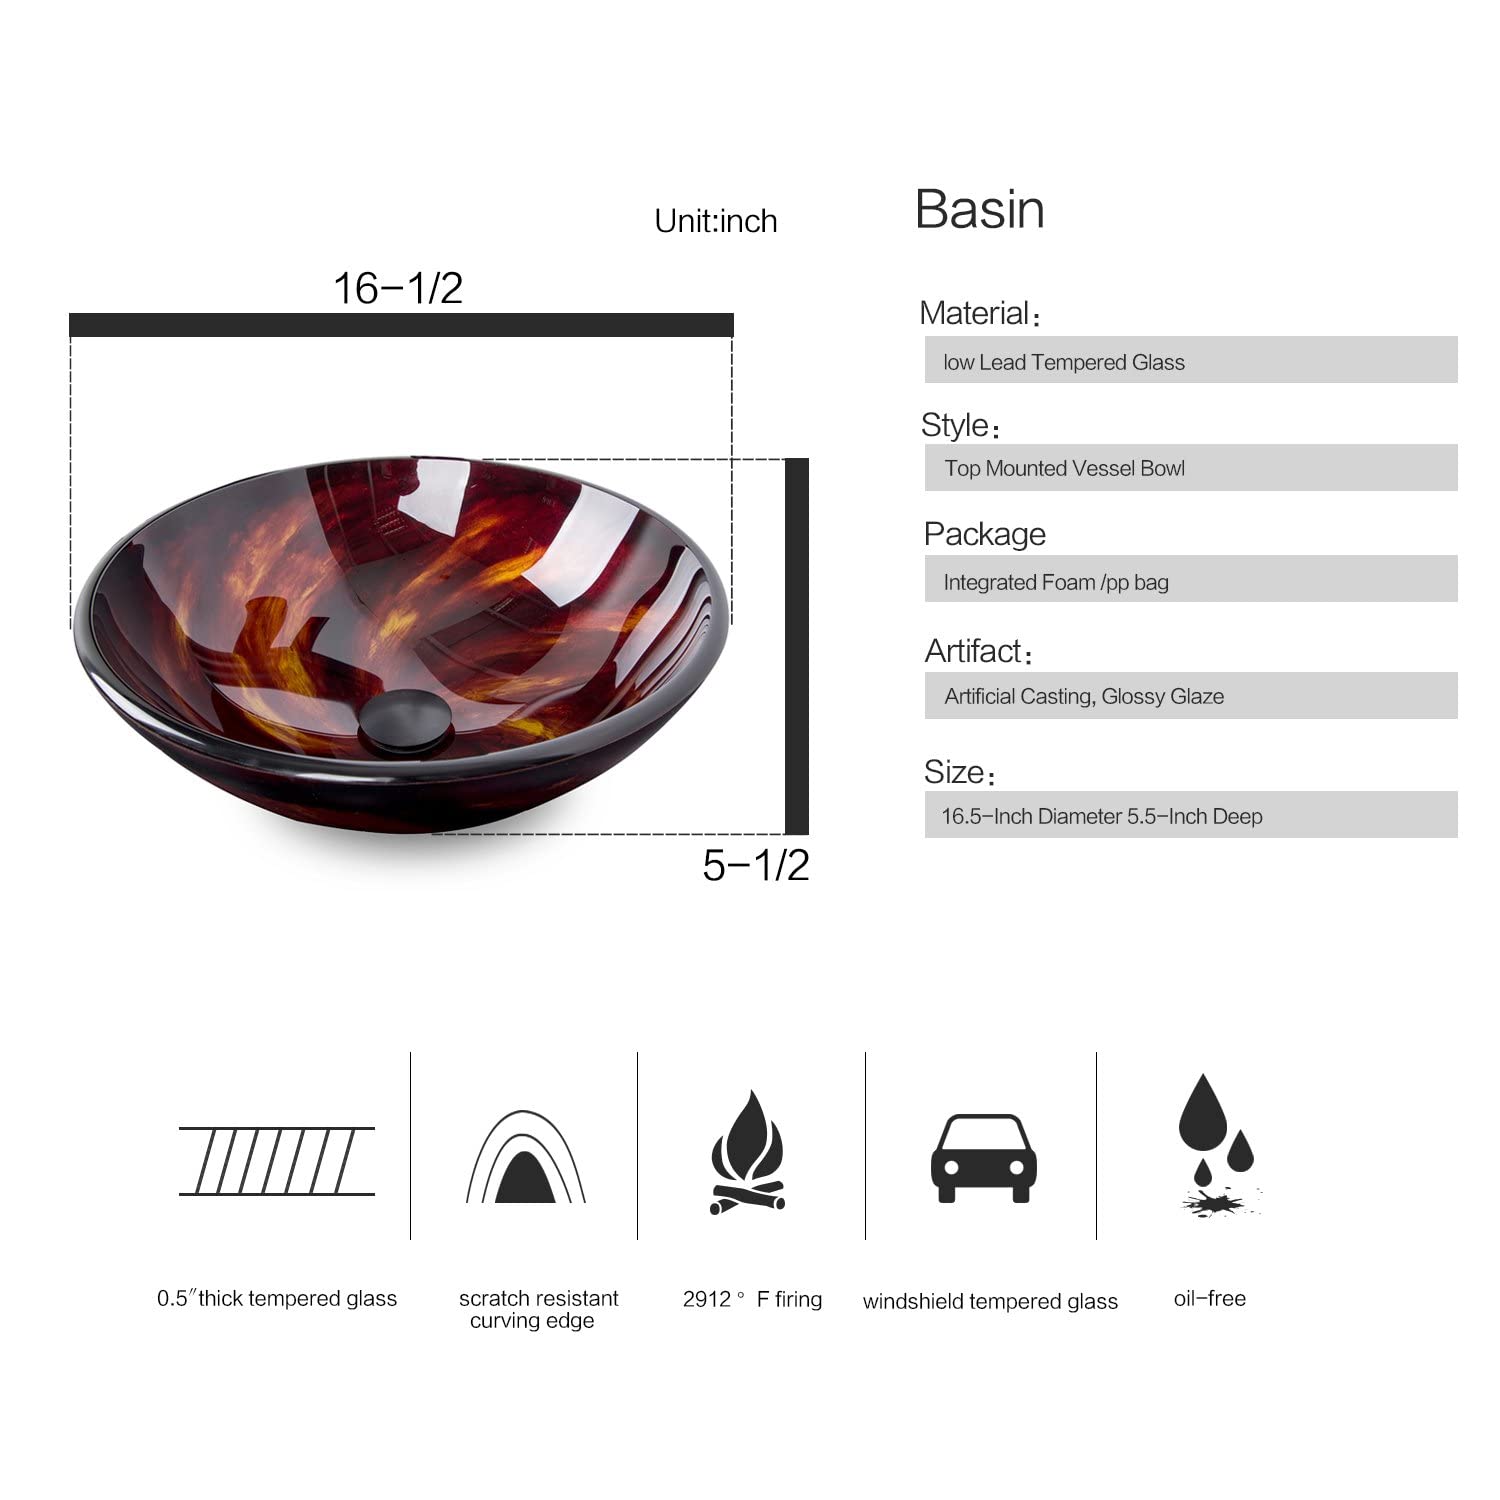 Elecwish flame red round sink size and specification